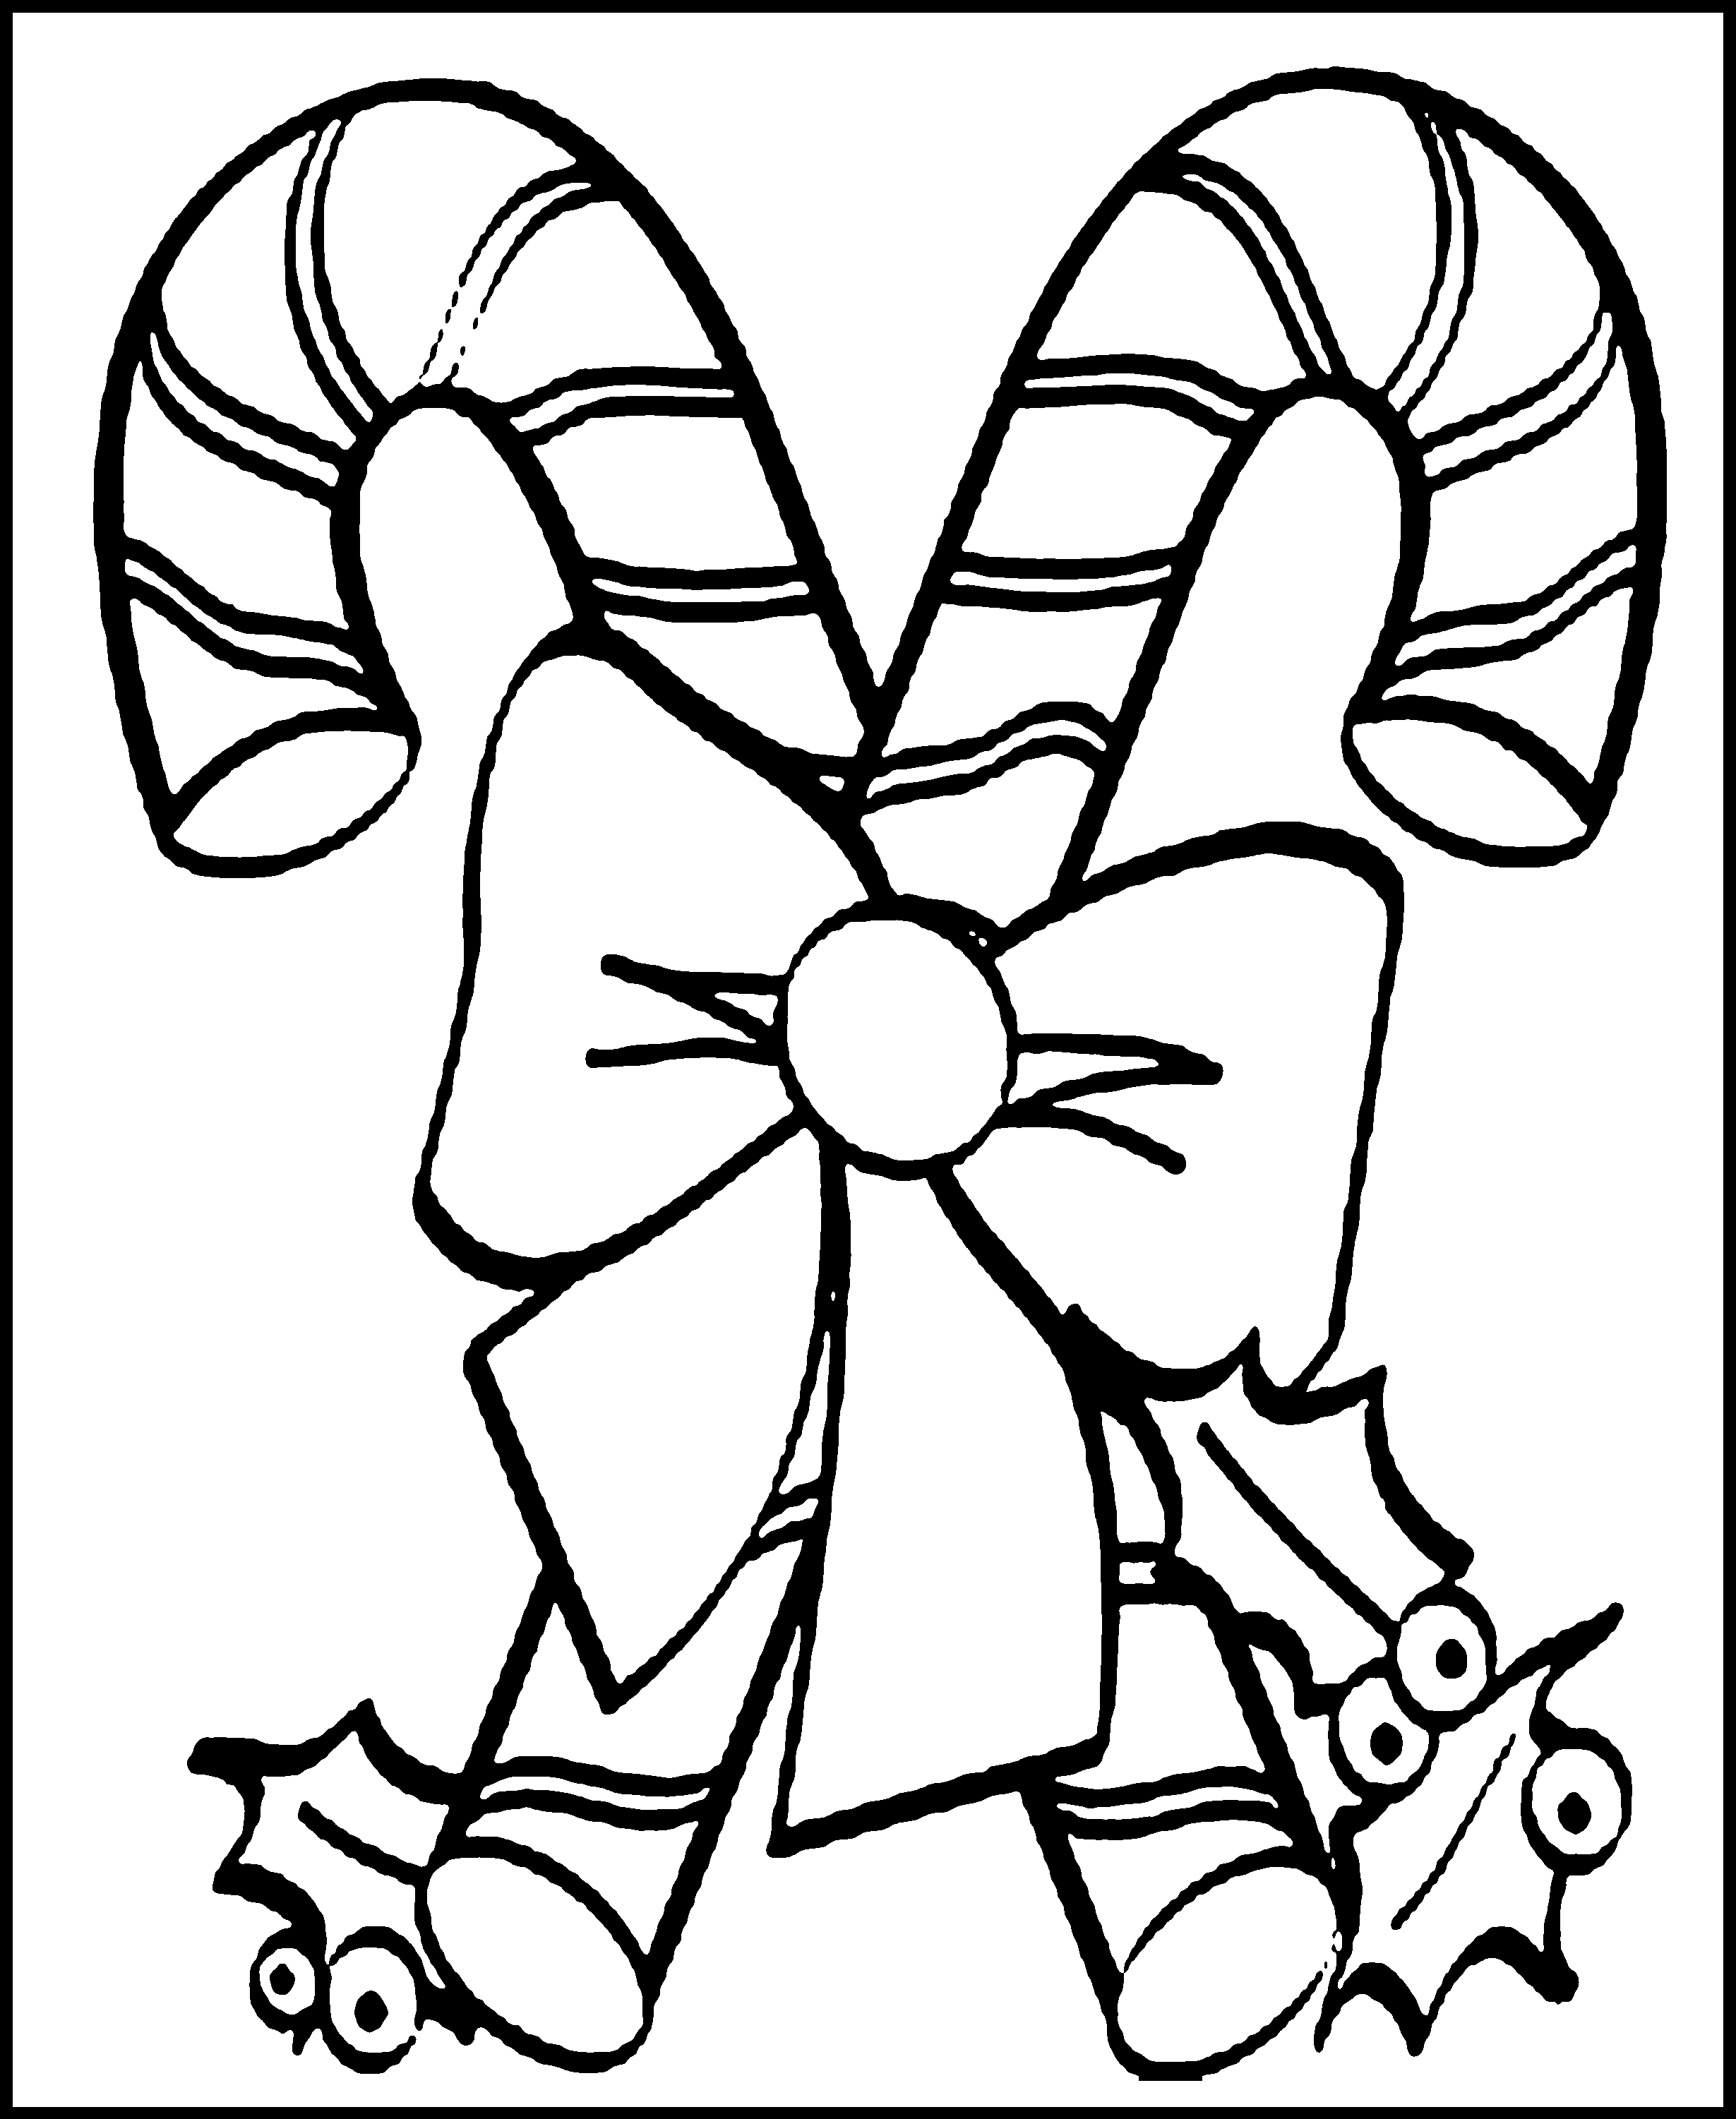 Free Printable Candy Cane Coloring Pages For Kids Coloring Wallpapers Download Free Images Wallpaper [coloring654.blogspot.com]